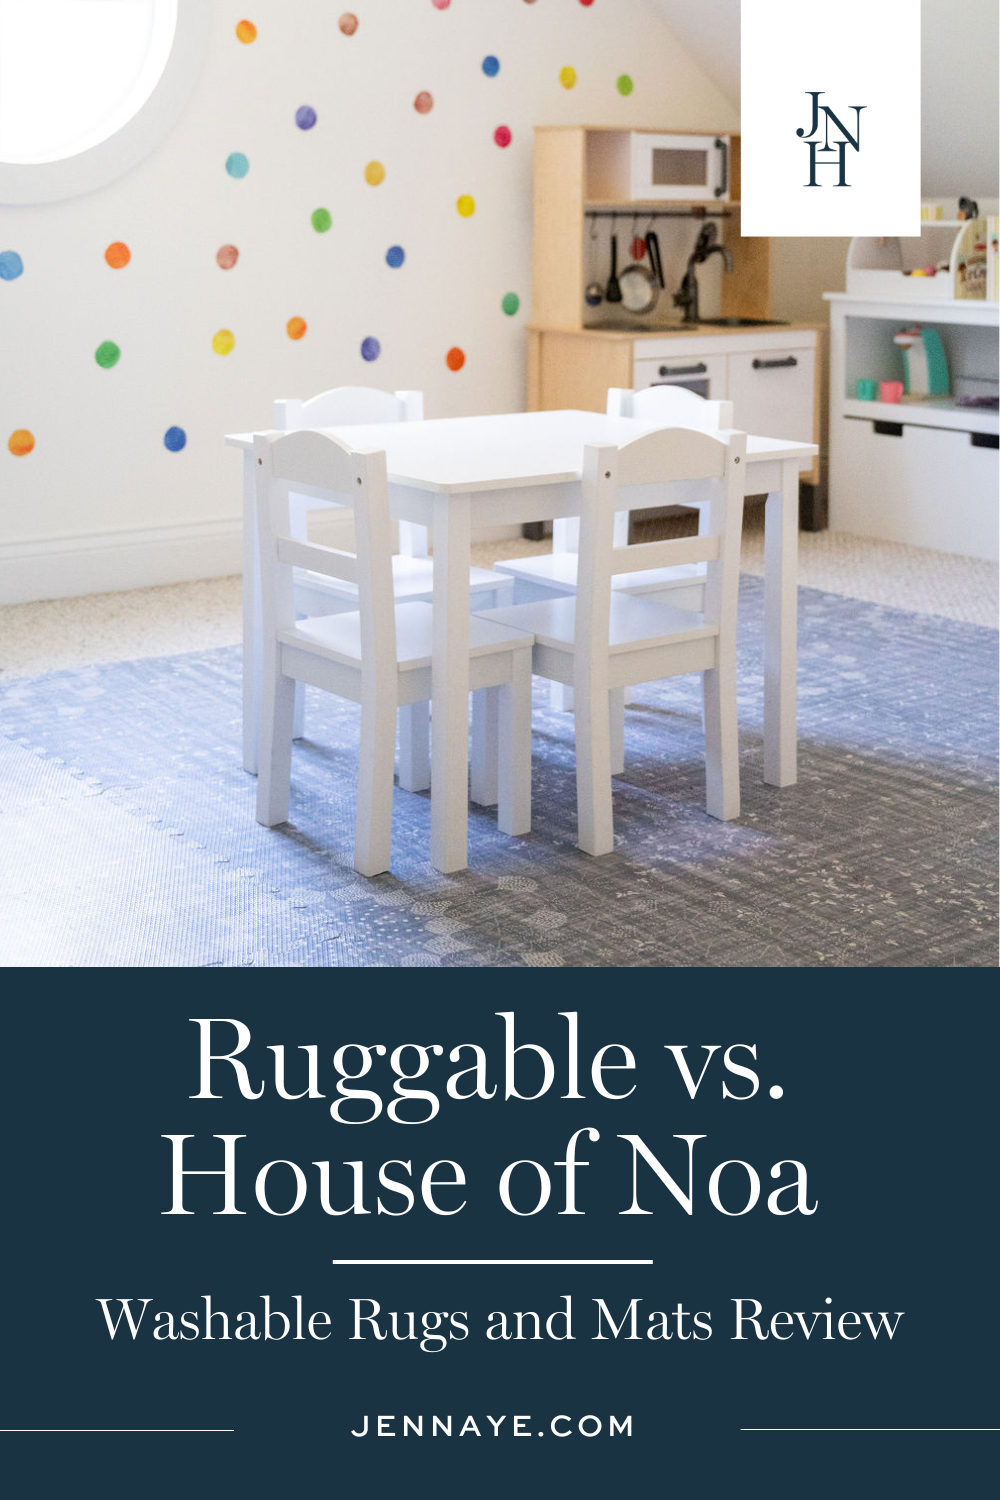 Ruggable vs. House of Noa Washable Rugs and Mats Review